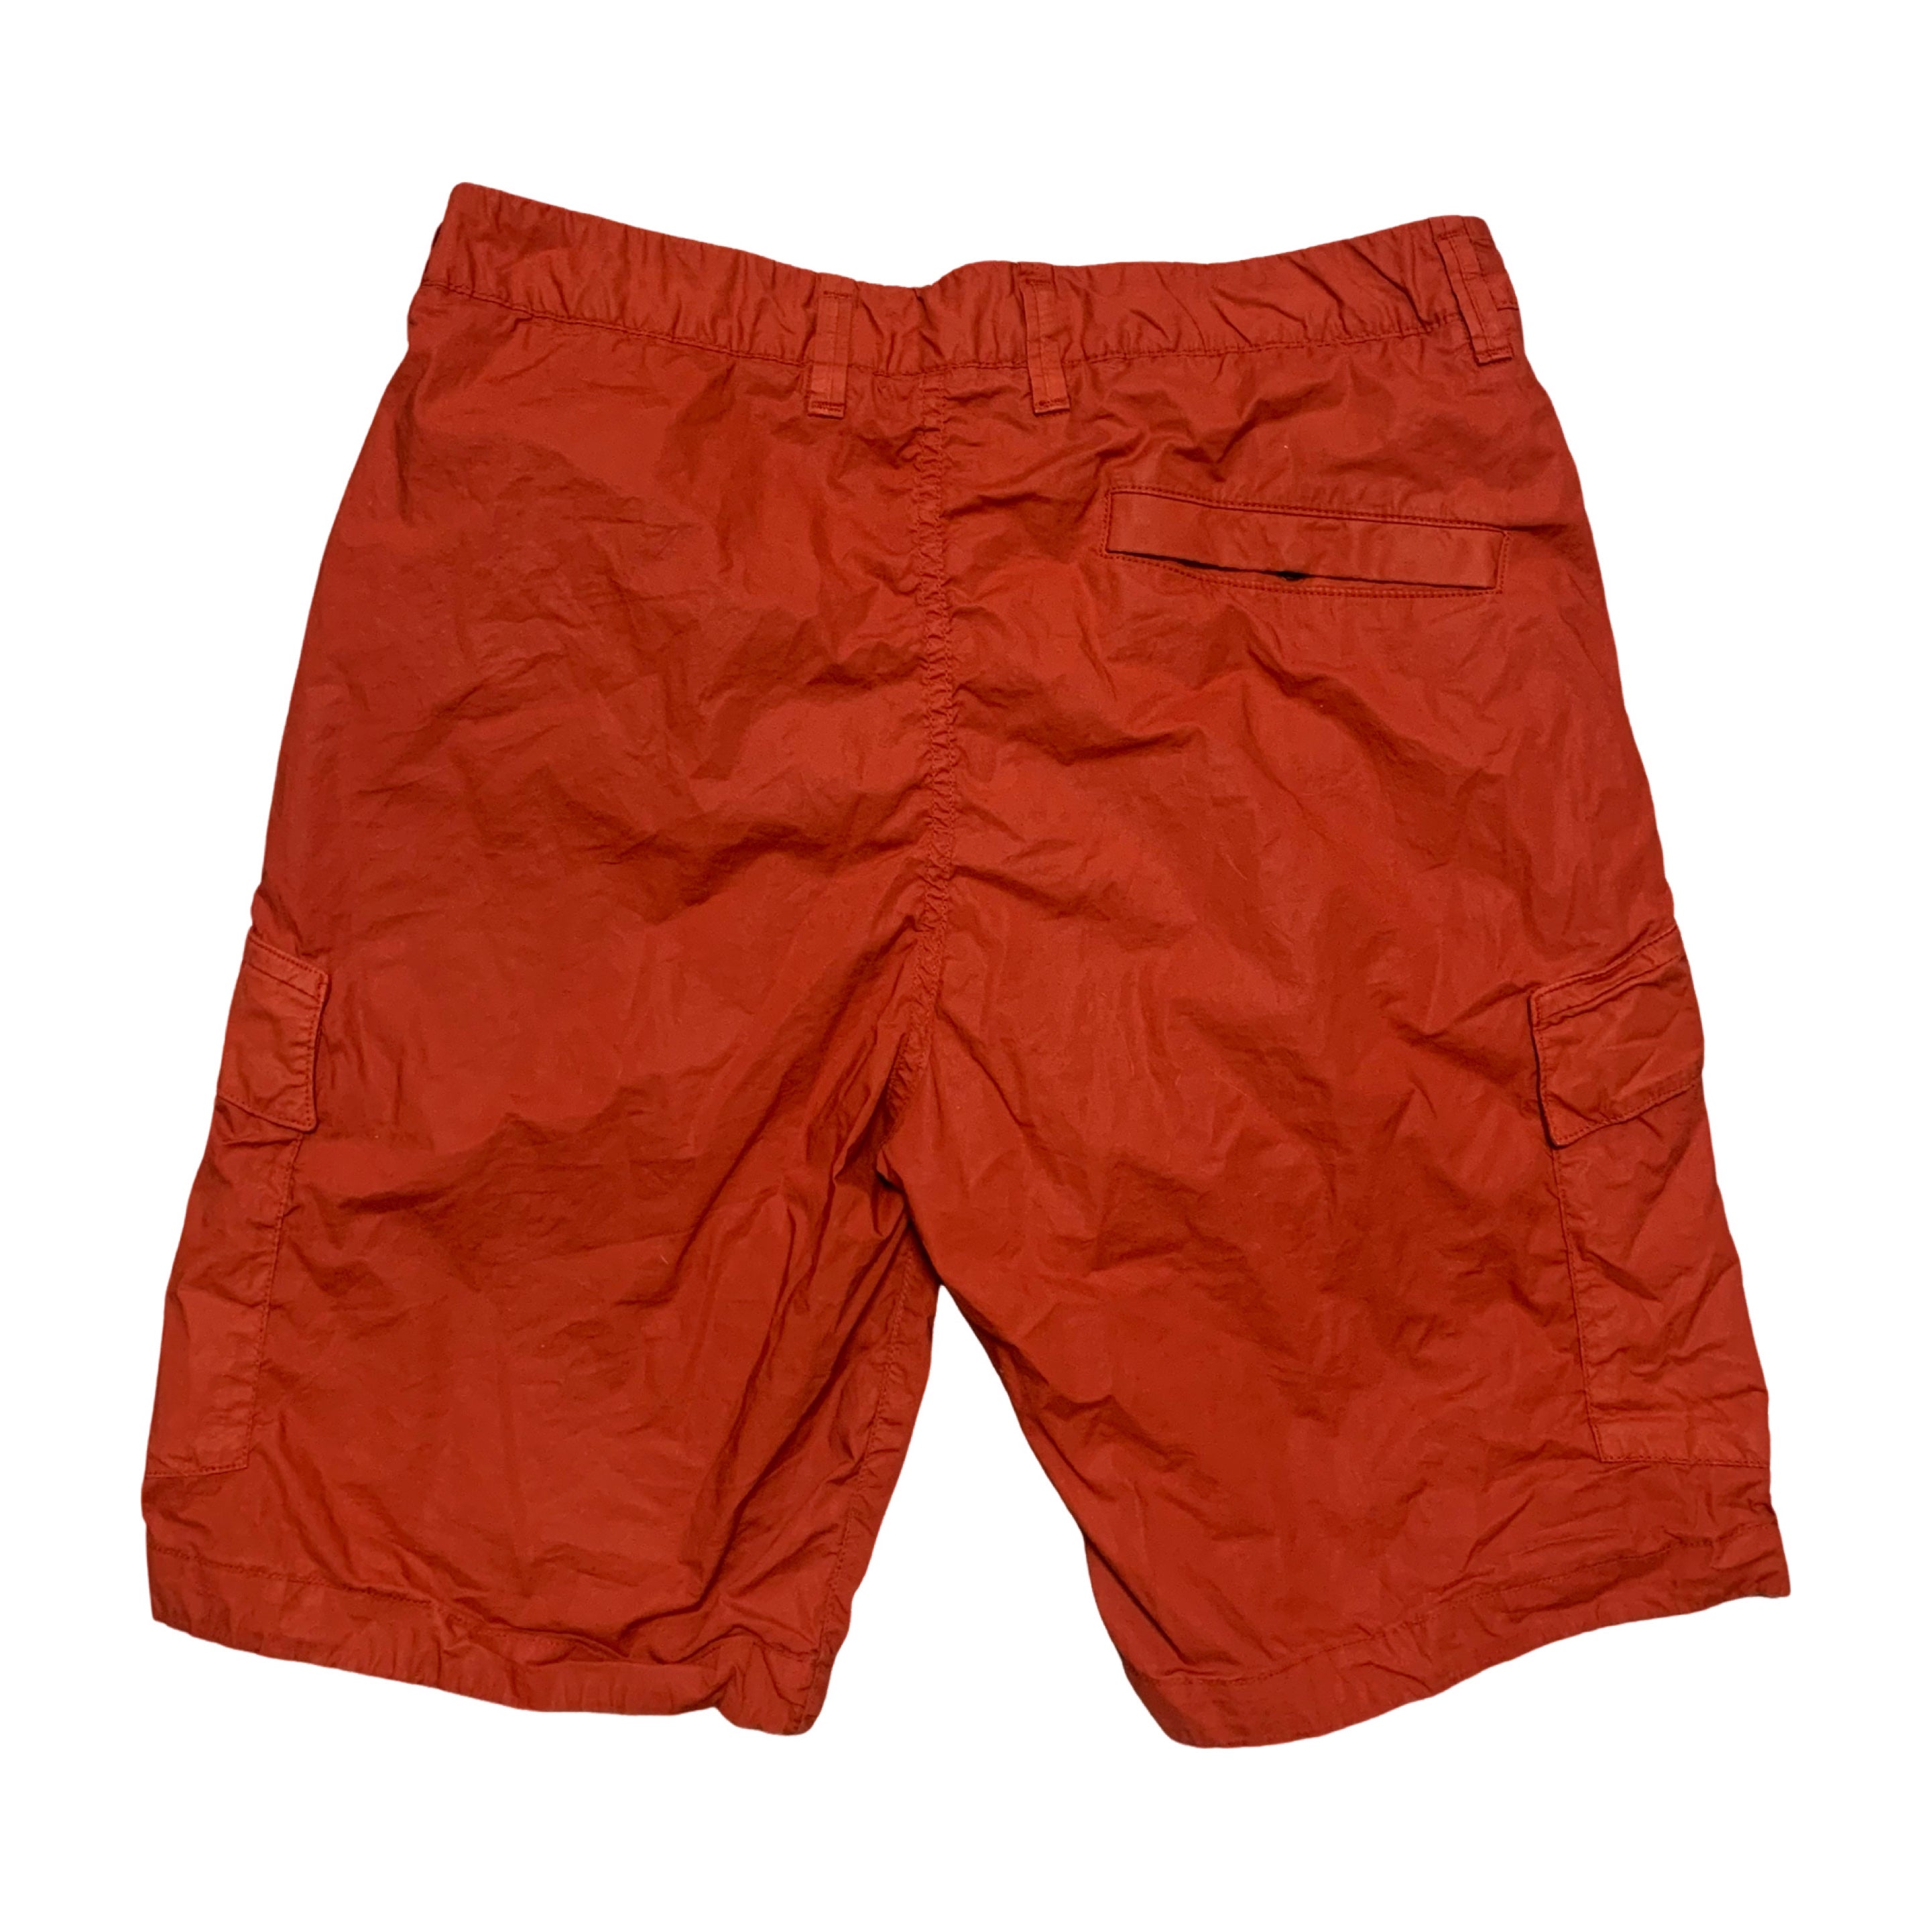 Stone Island Shorts Red Garment Dyed Cotton Cargo Shorts Bottoms Small W30